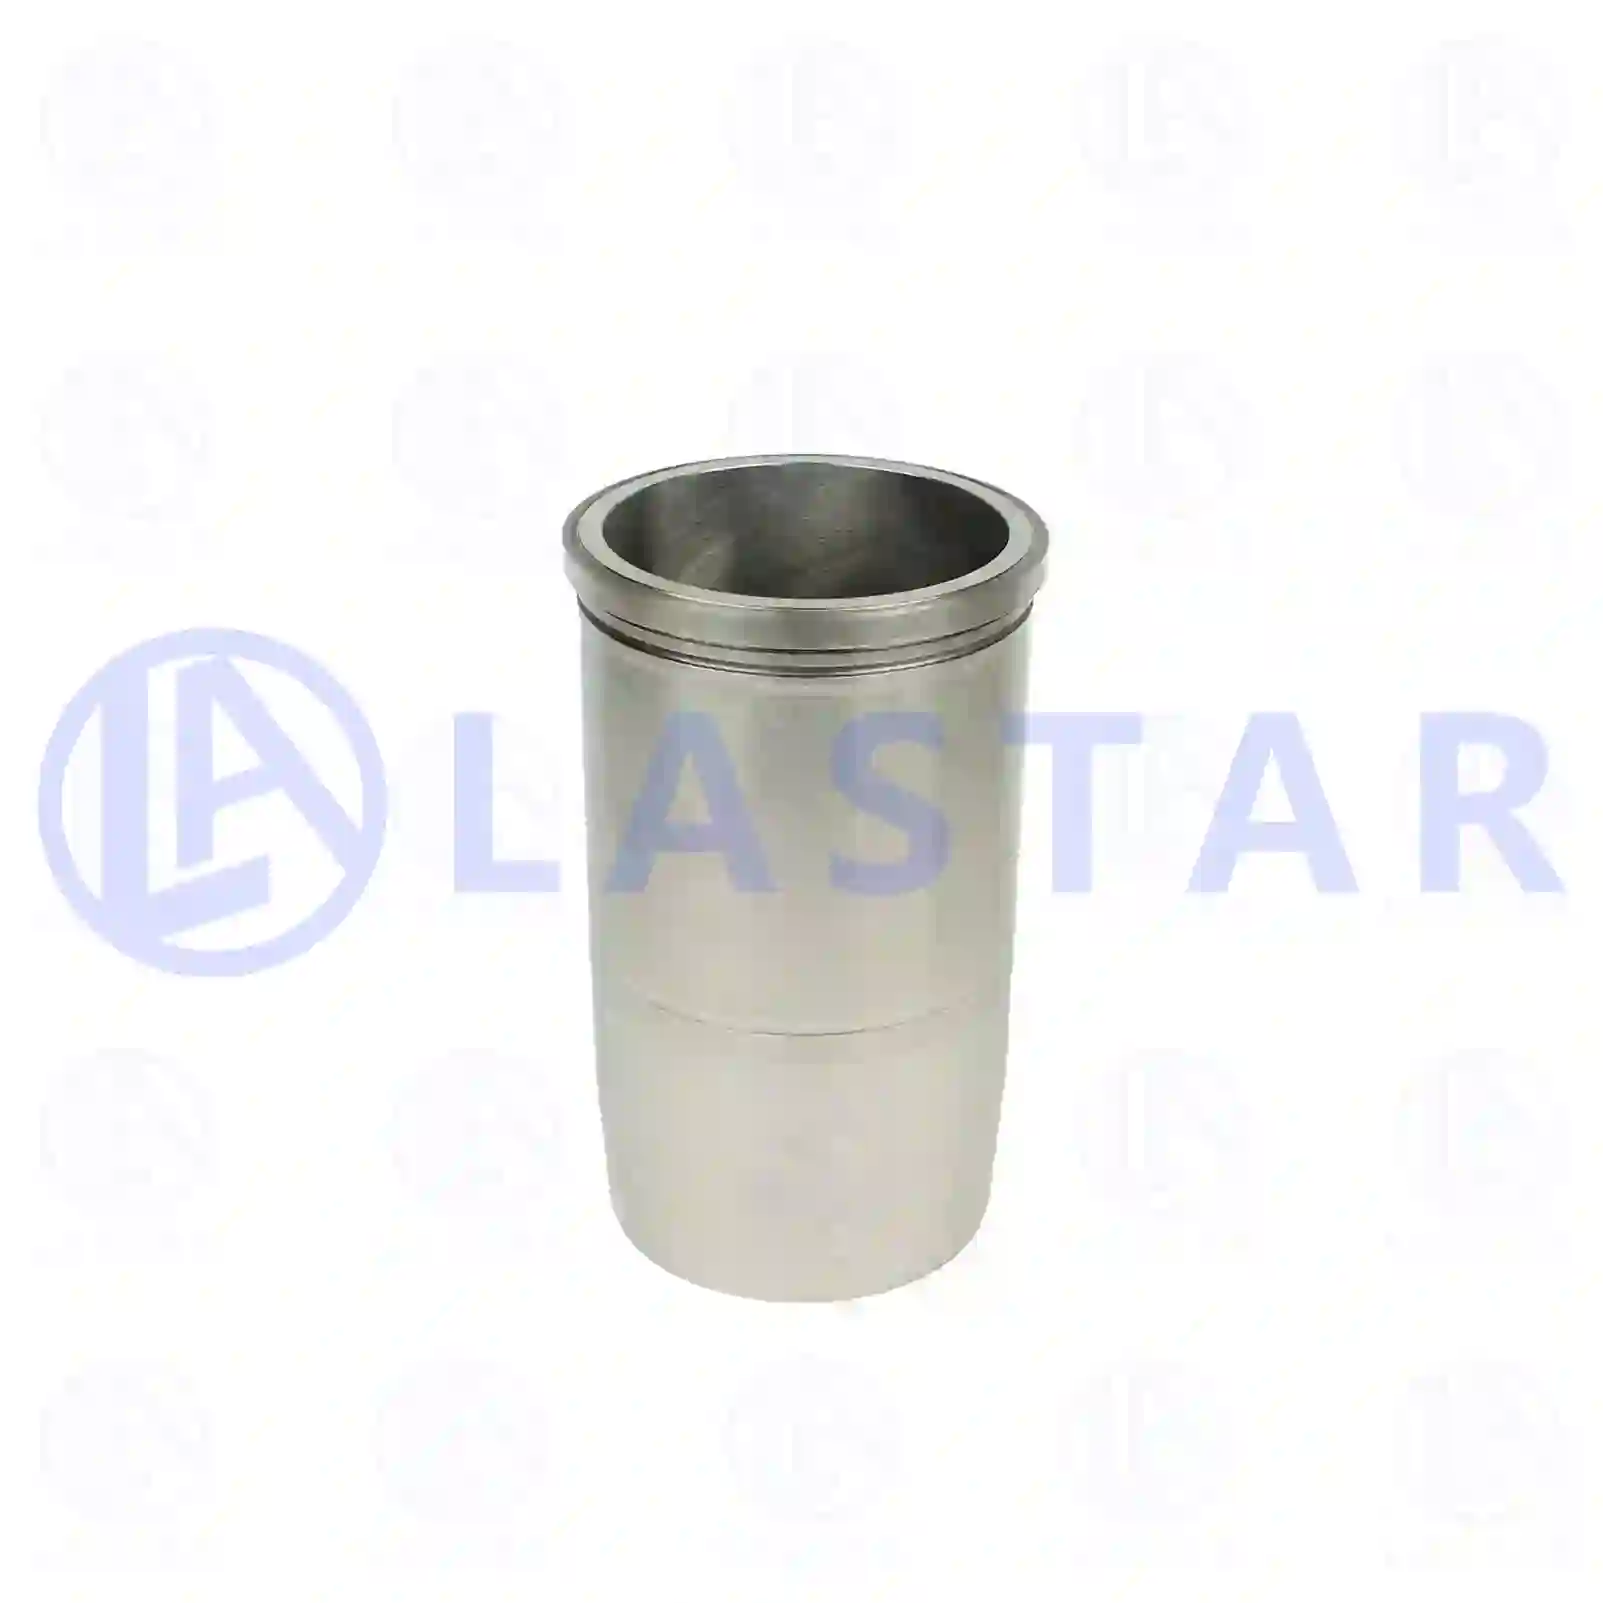 Cylinder liner, without seal rings, 77701029, 51012010305, 5101 ||  77701029 Lastar Spare Part | Truck Spare Parts, Auotomotive Spare Parts Cylinder liner, without seal rings, 77701029, 51012010305, 5101 ||  77701029 Lastar Spare Part | Truck Spare Parts, Auotomotive Spare Parts